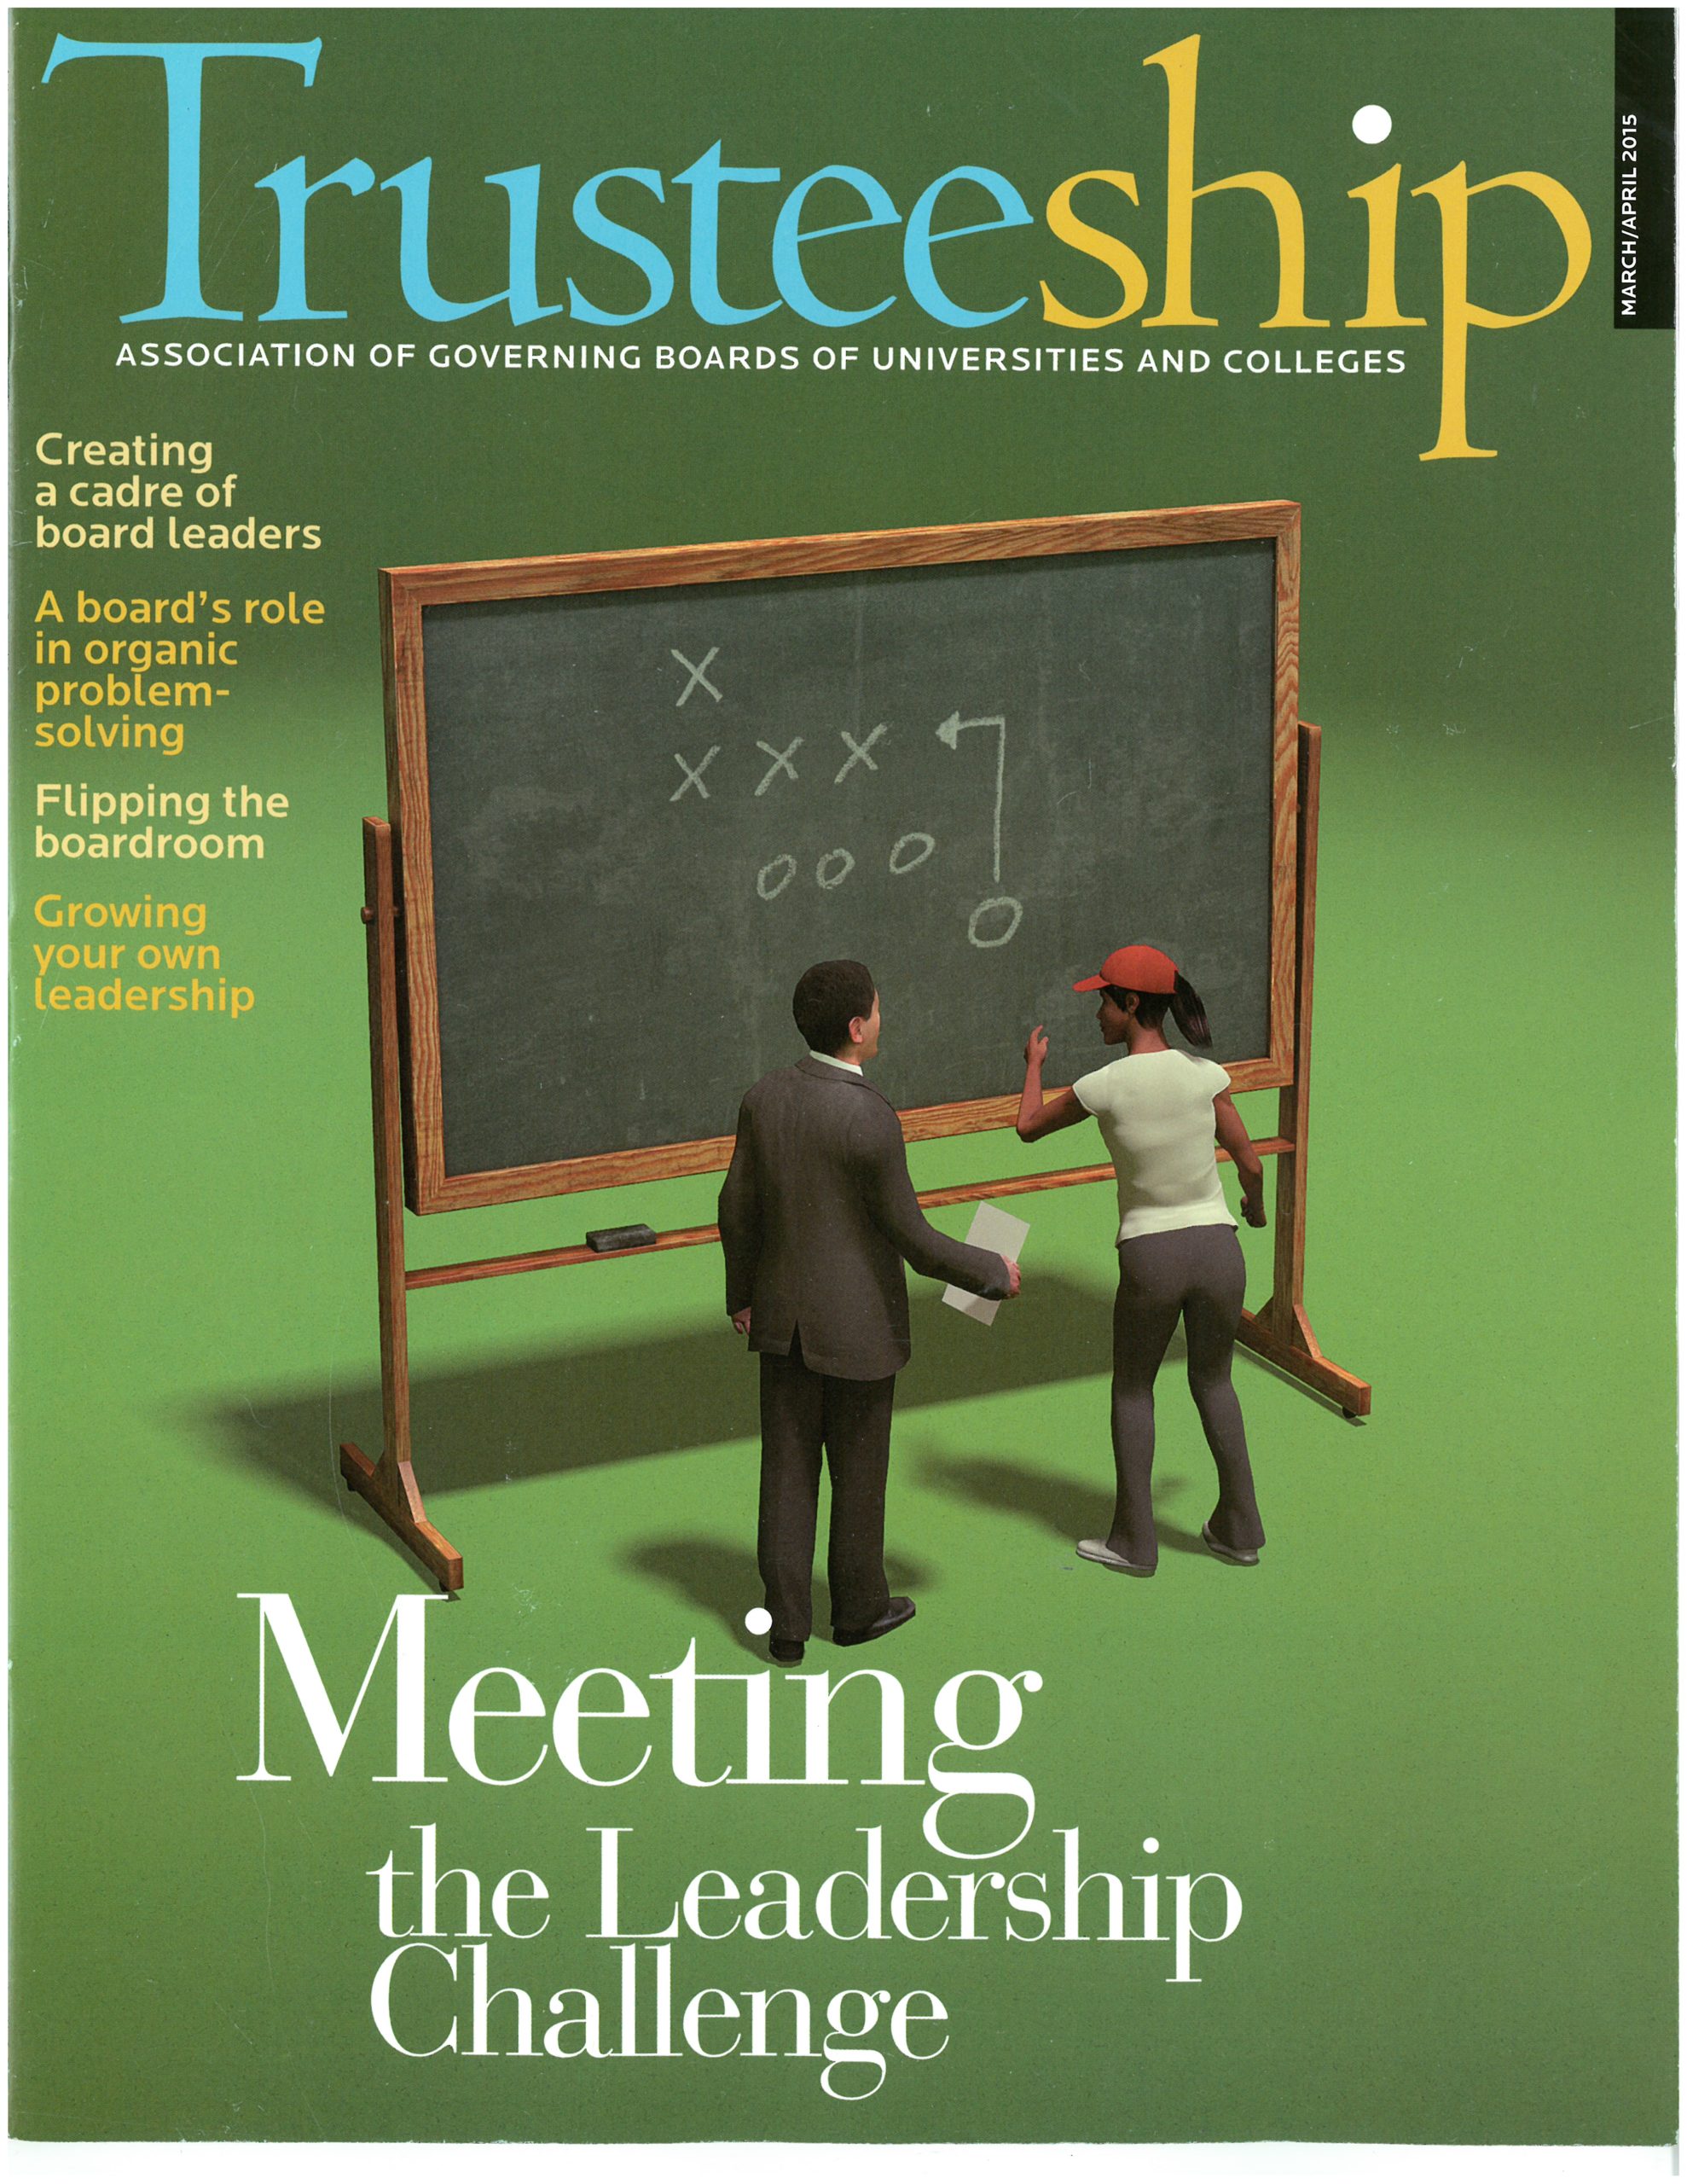 AGB Trusteeship Magazine March/April 2015 with cover article "Meeting the Leadership Challenge"